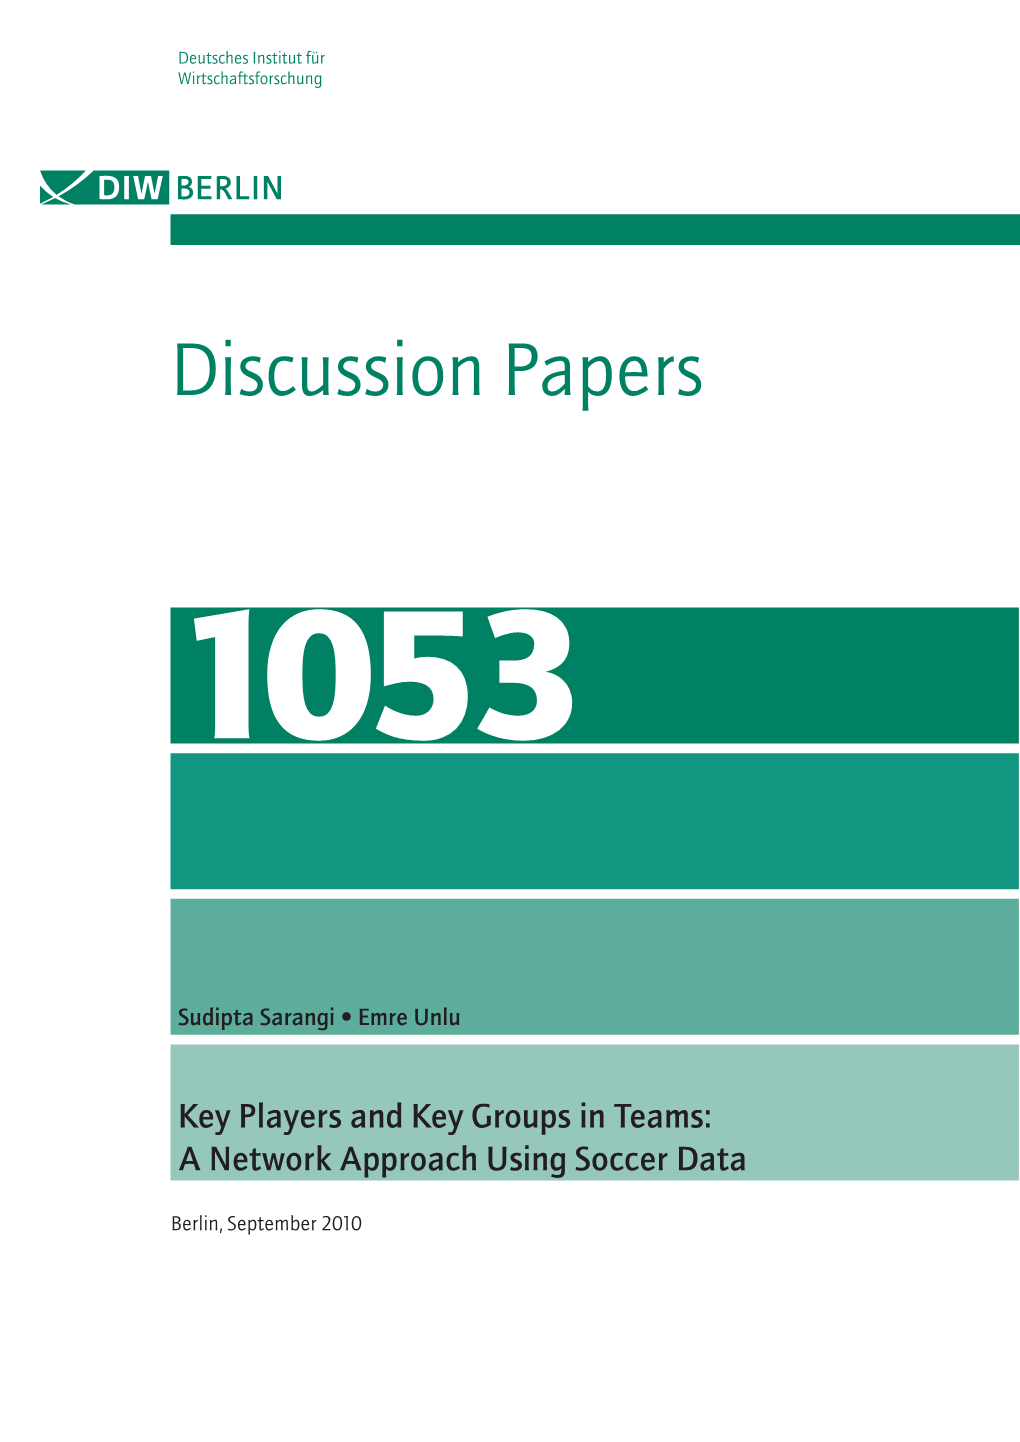 Key Players and Key Groups in Teams: a Network Approach Using Soccer Data